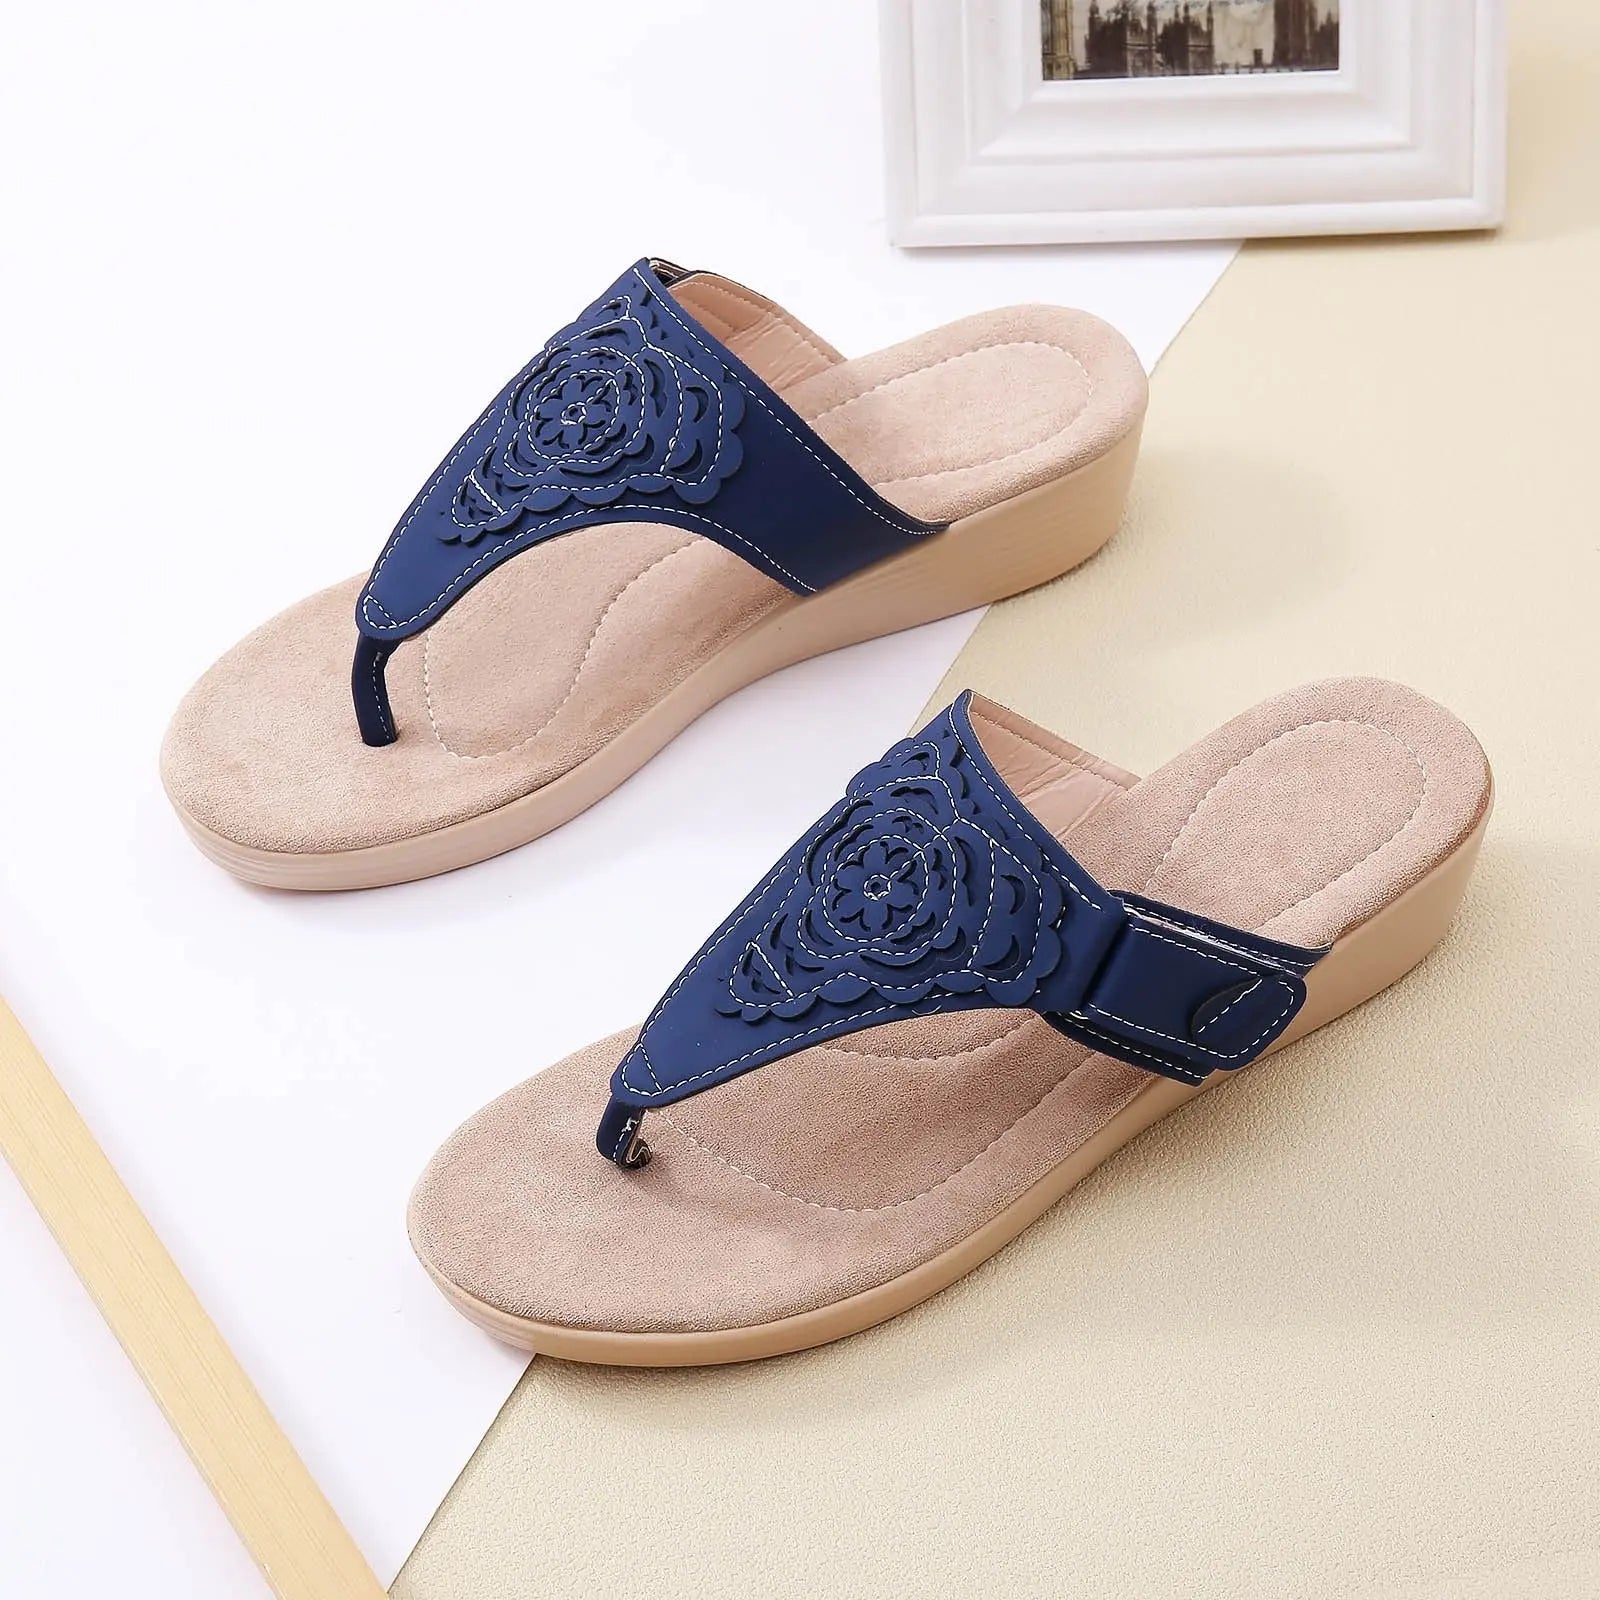 Flower embroidered sandals Vivid Lilies